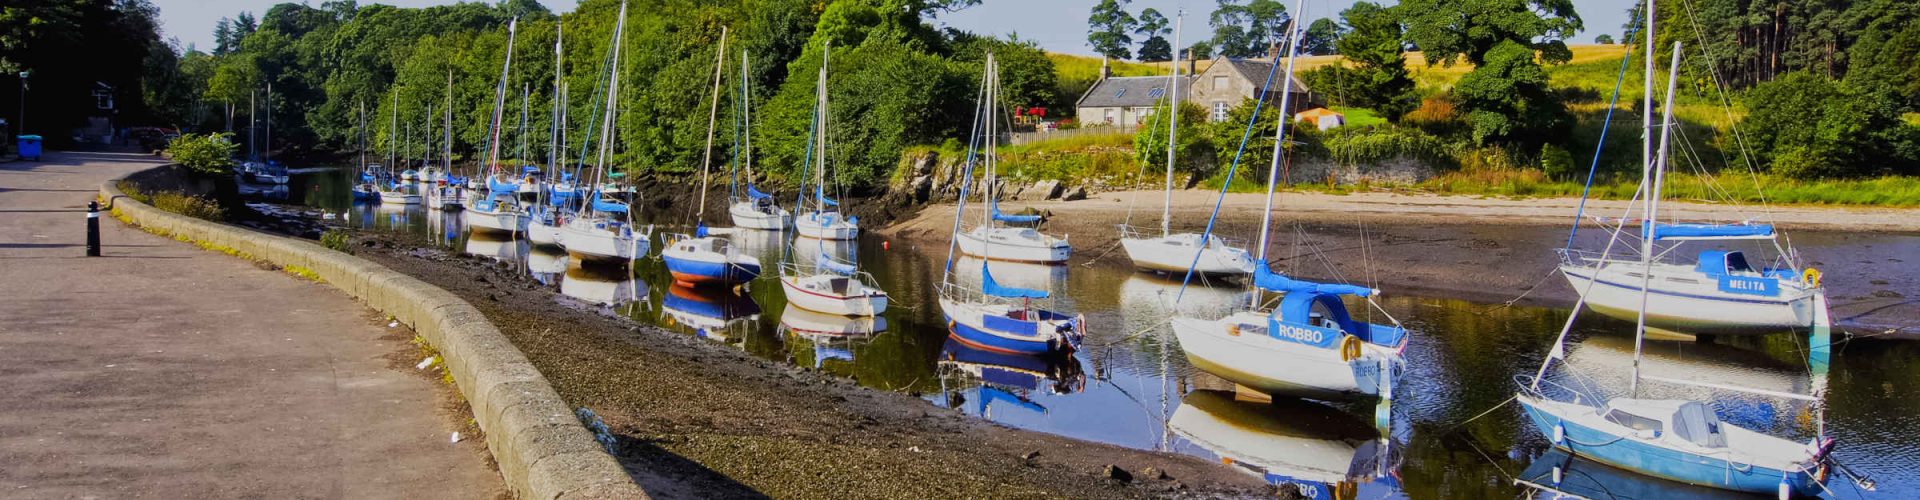 Boats in Cramond Harbour